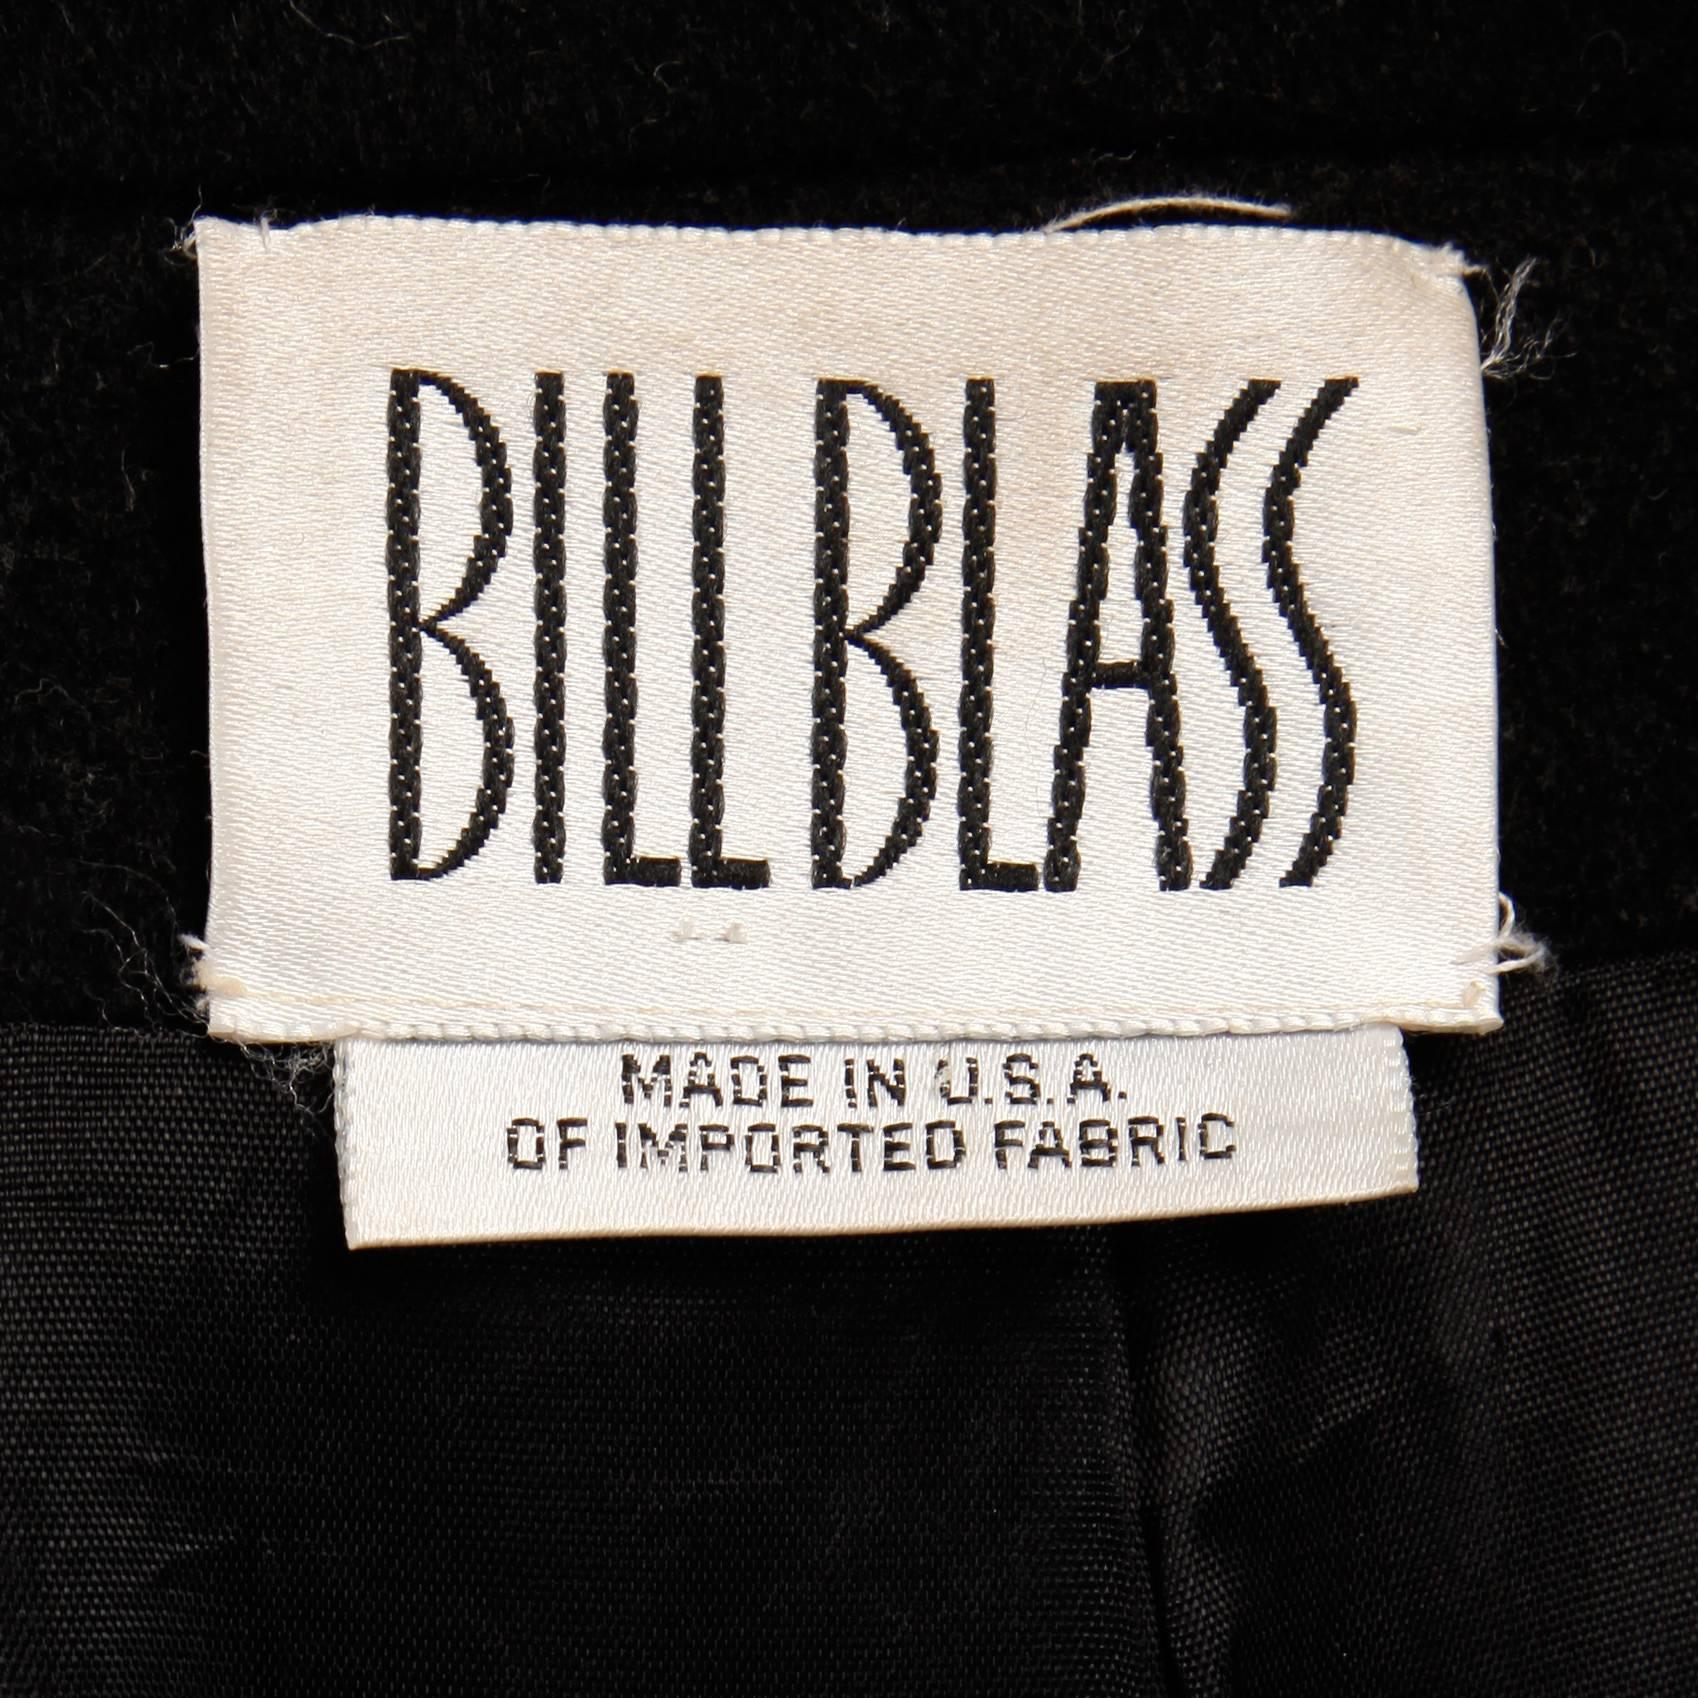 Stunning vintage black wool maxi coat by Bill Blass. Double breasted military buttons and epaulettes. Fully lined with front button closure. This coat fits like a modern size medium-large. The bust measures 39", waist 34", hips 46",